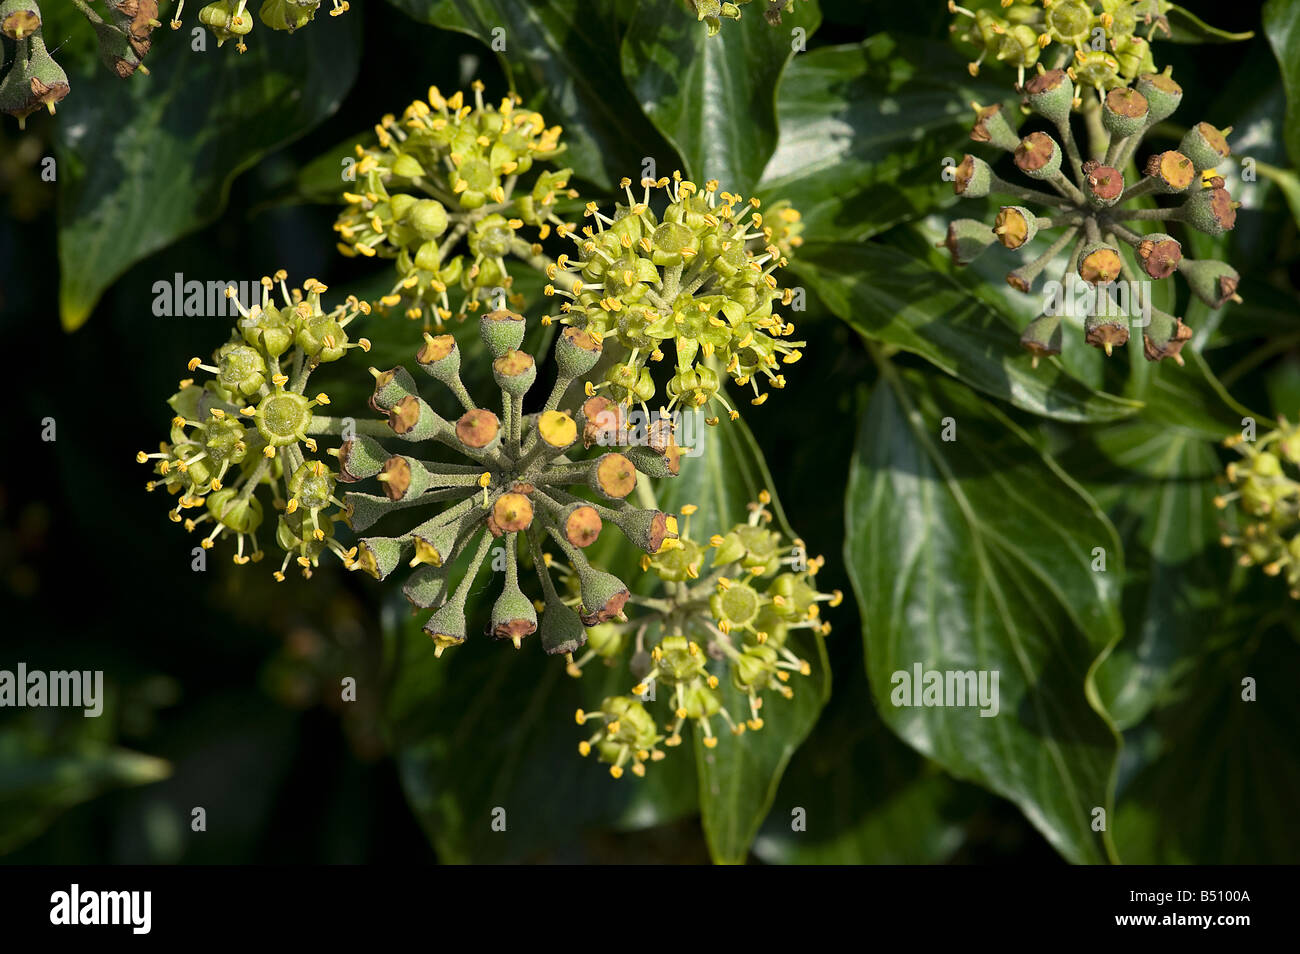 Clusters of ivy Hedera flowers and fruits Stock Photo